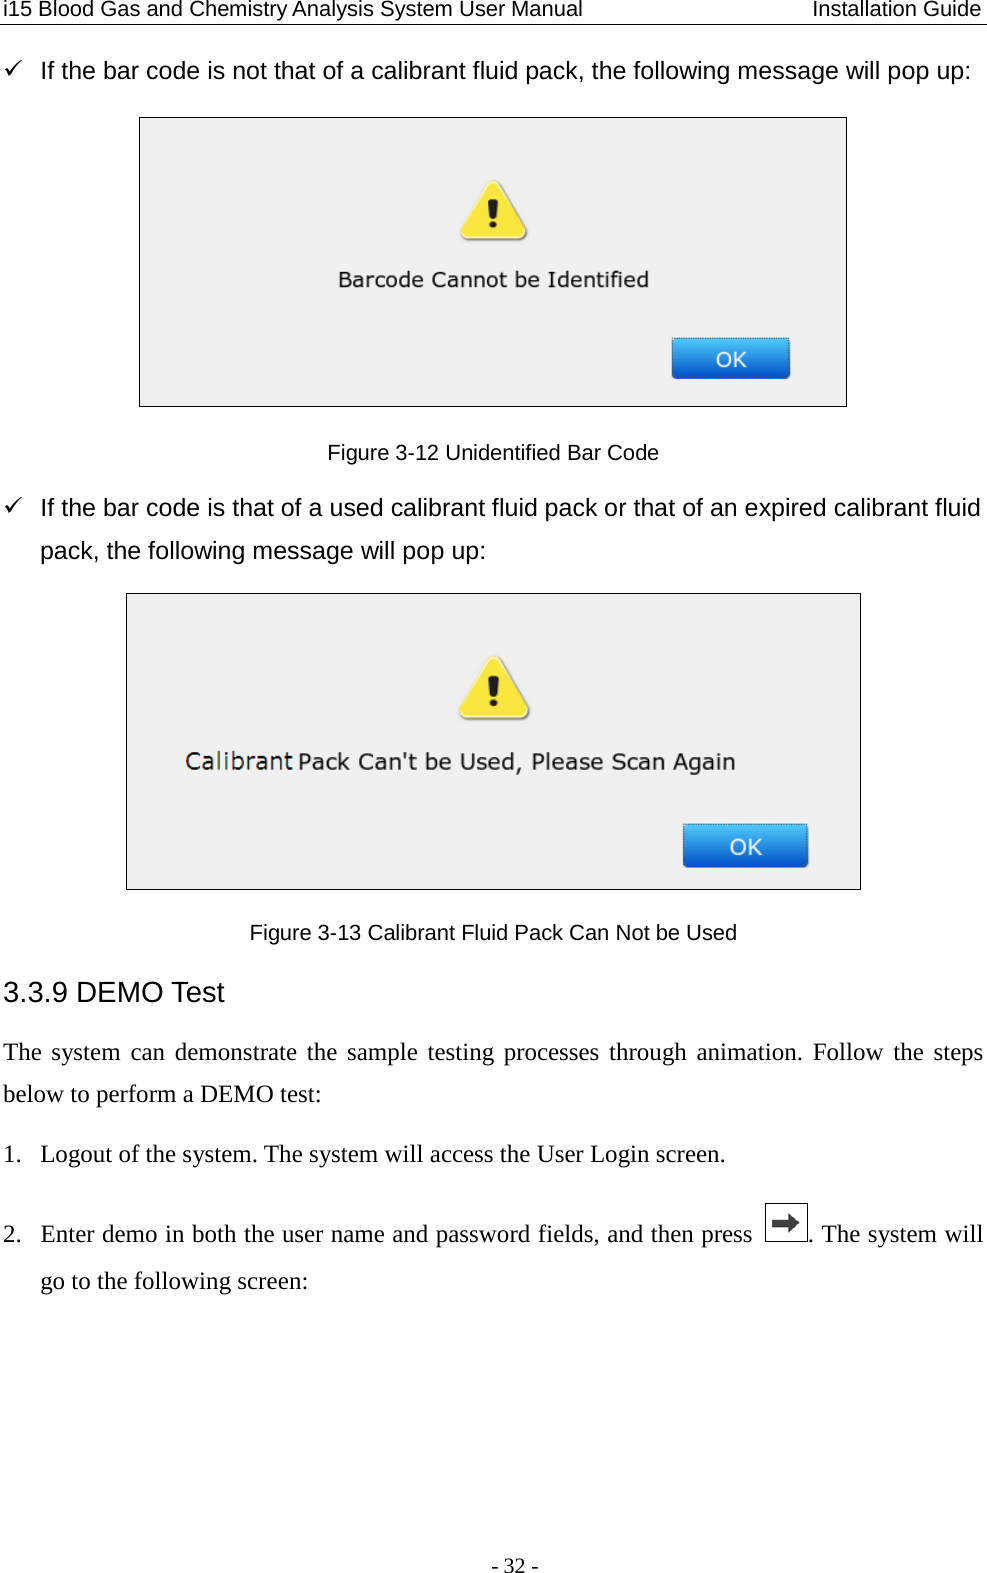 i15 Blood Gas and Chemistry Analysis System User Manual                     Installation Guide - 32 -   If the bar code is not that of a calibrant fluid pack, the following message will pop up:  Figure 3-12 Unidentified Bar Code   If the bar code is that of a used calibrant fluid pack or that of an expired calibrant fluid pack, the following message will pop up:  Figure 3-13 Calibrant Fluid Pack Can Not be Used 3.3.9 DEMO Test The system can demonstrate the sample testing processes through animation. Follow the steps below to perform a DEMO test: 1. Logout of the system. The system will access the User Login screen. 2. Enter demo in both the user name and password fields, and then press  . The system will go to the following screen: 